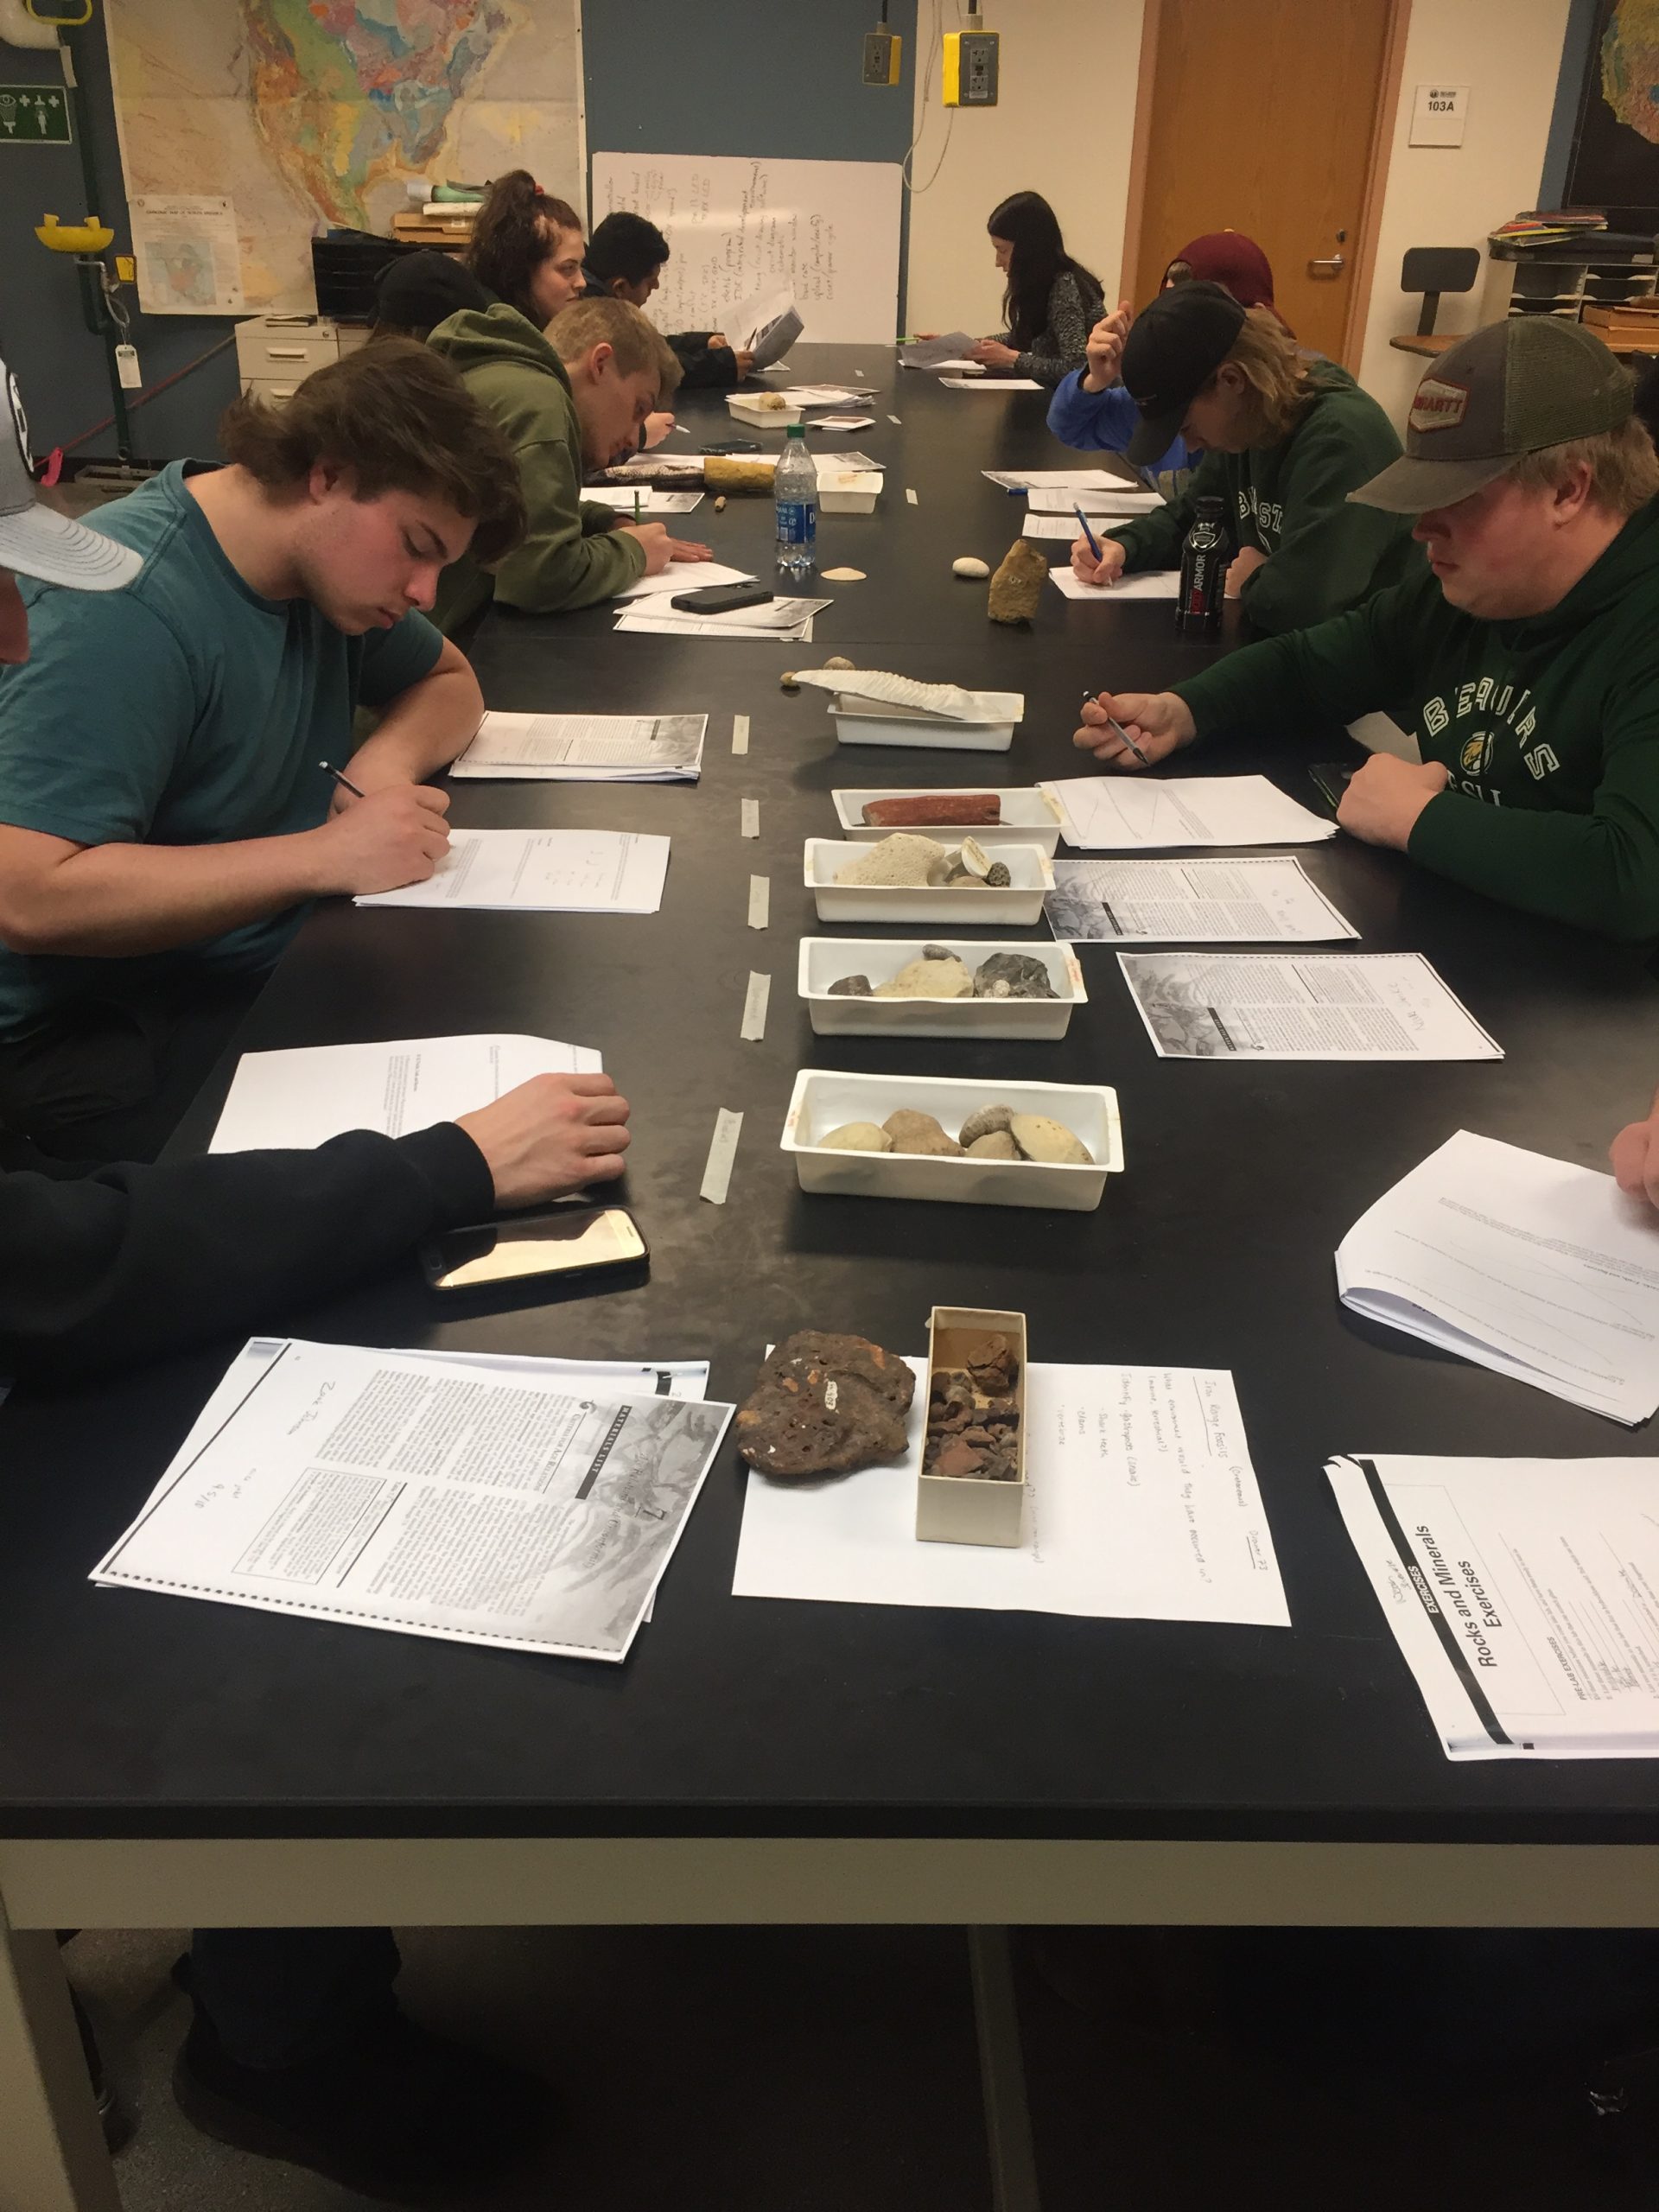 Students sitting on either side of a lab table with trays of rocks and papers in the middle